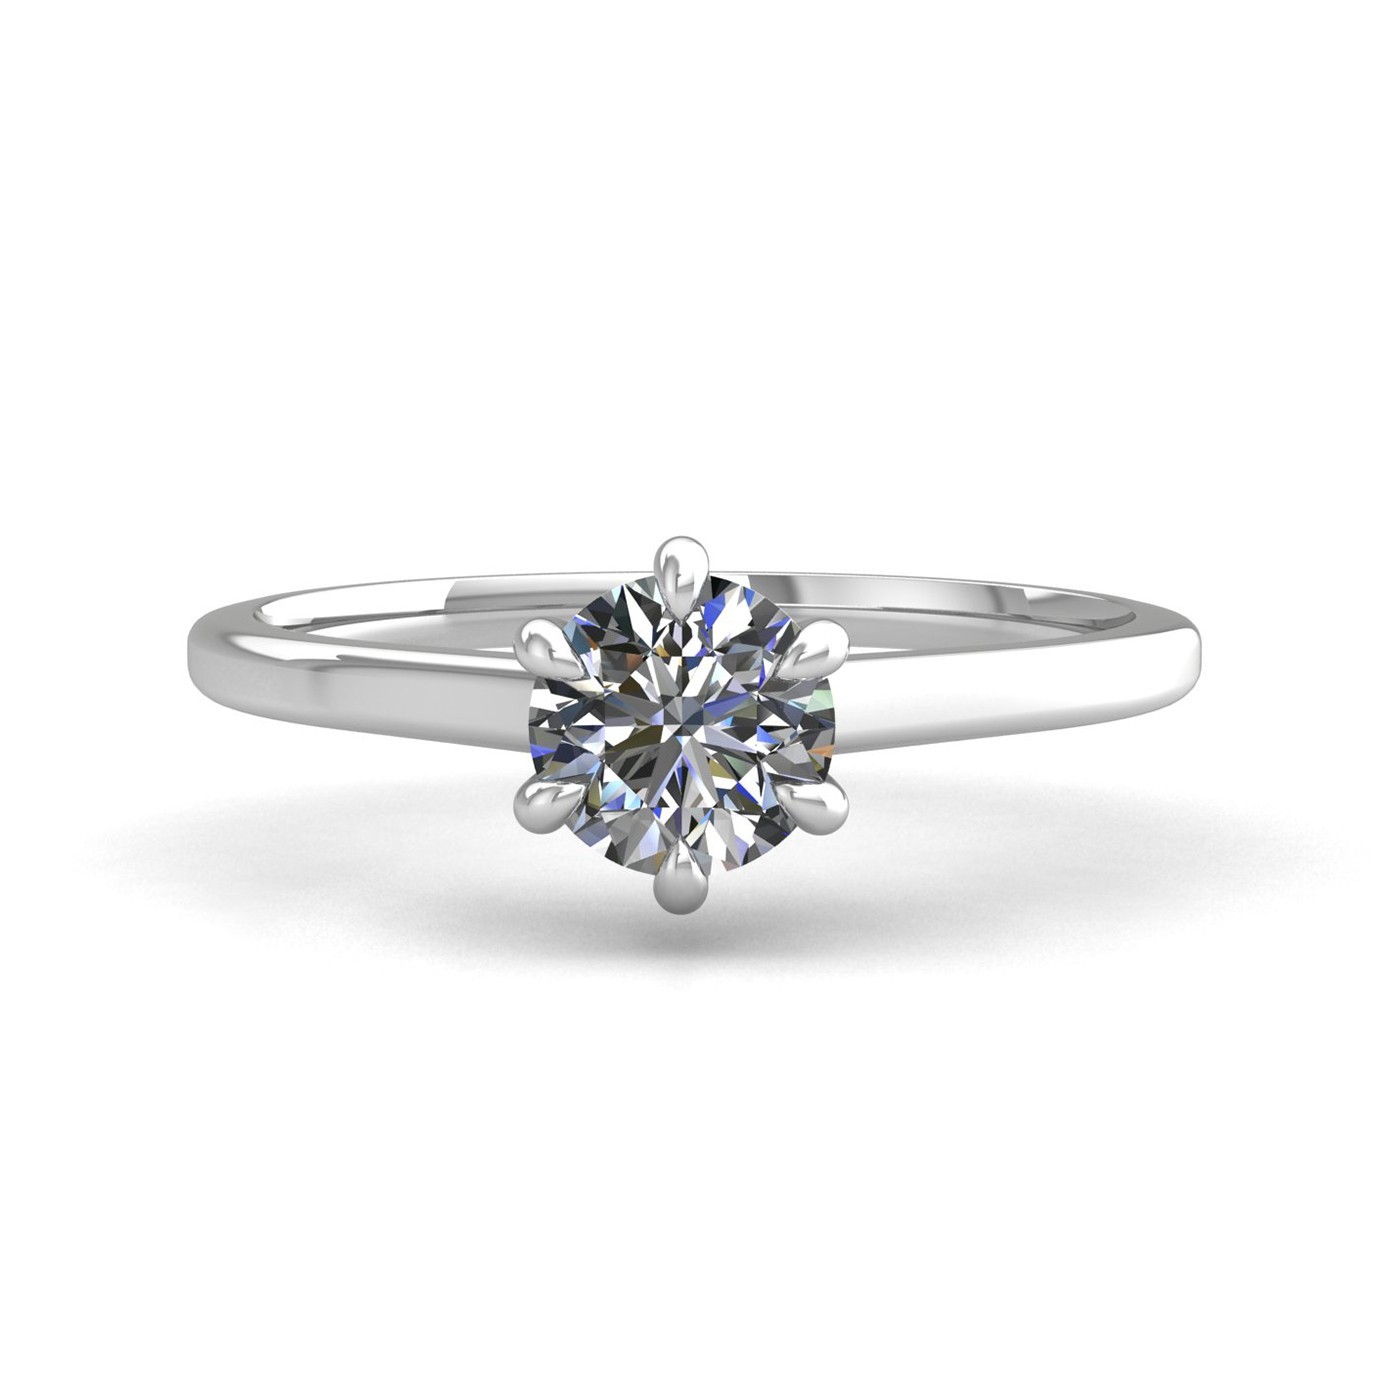 18k white gold 2,50 ct 6 prongs solitaire round cut diamond engagement ring with whisper thin band Photos & images